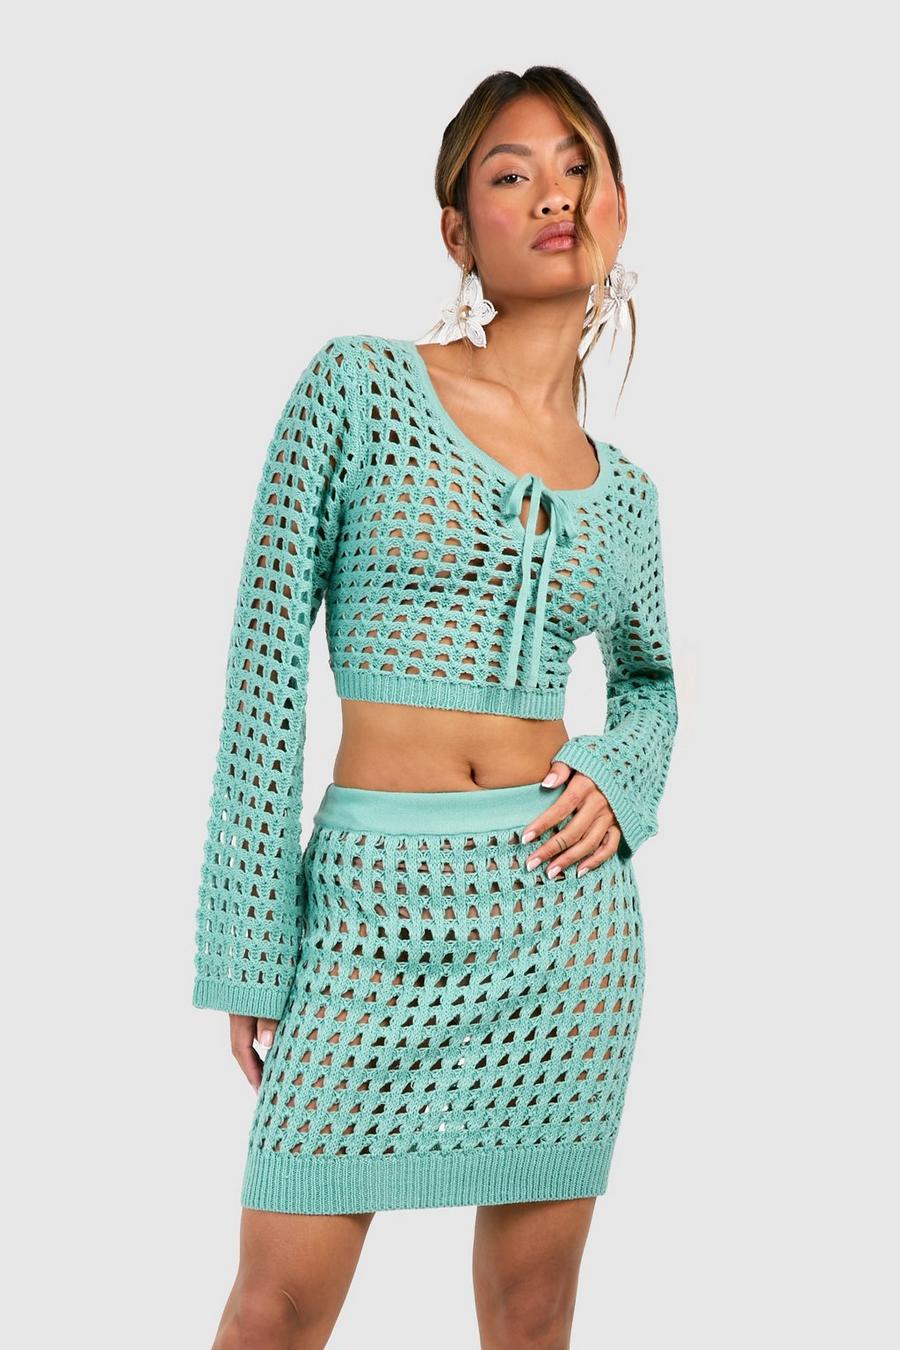 Turquoise Crochet Lace Up Crop Top